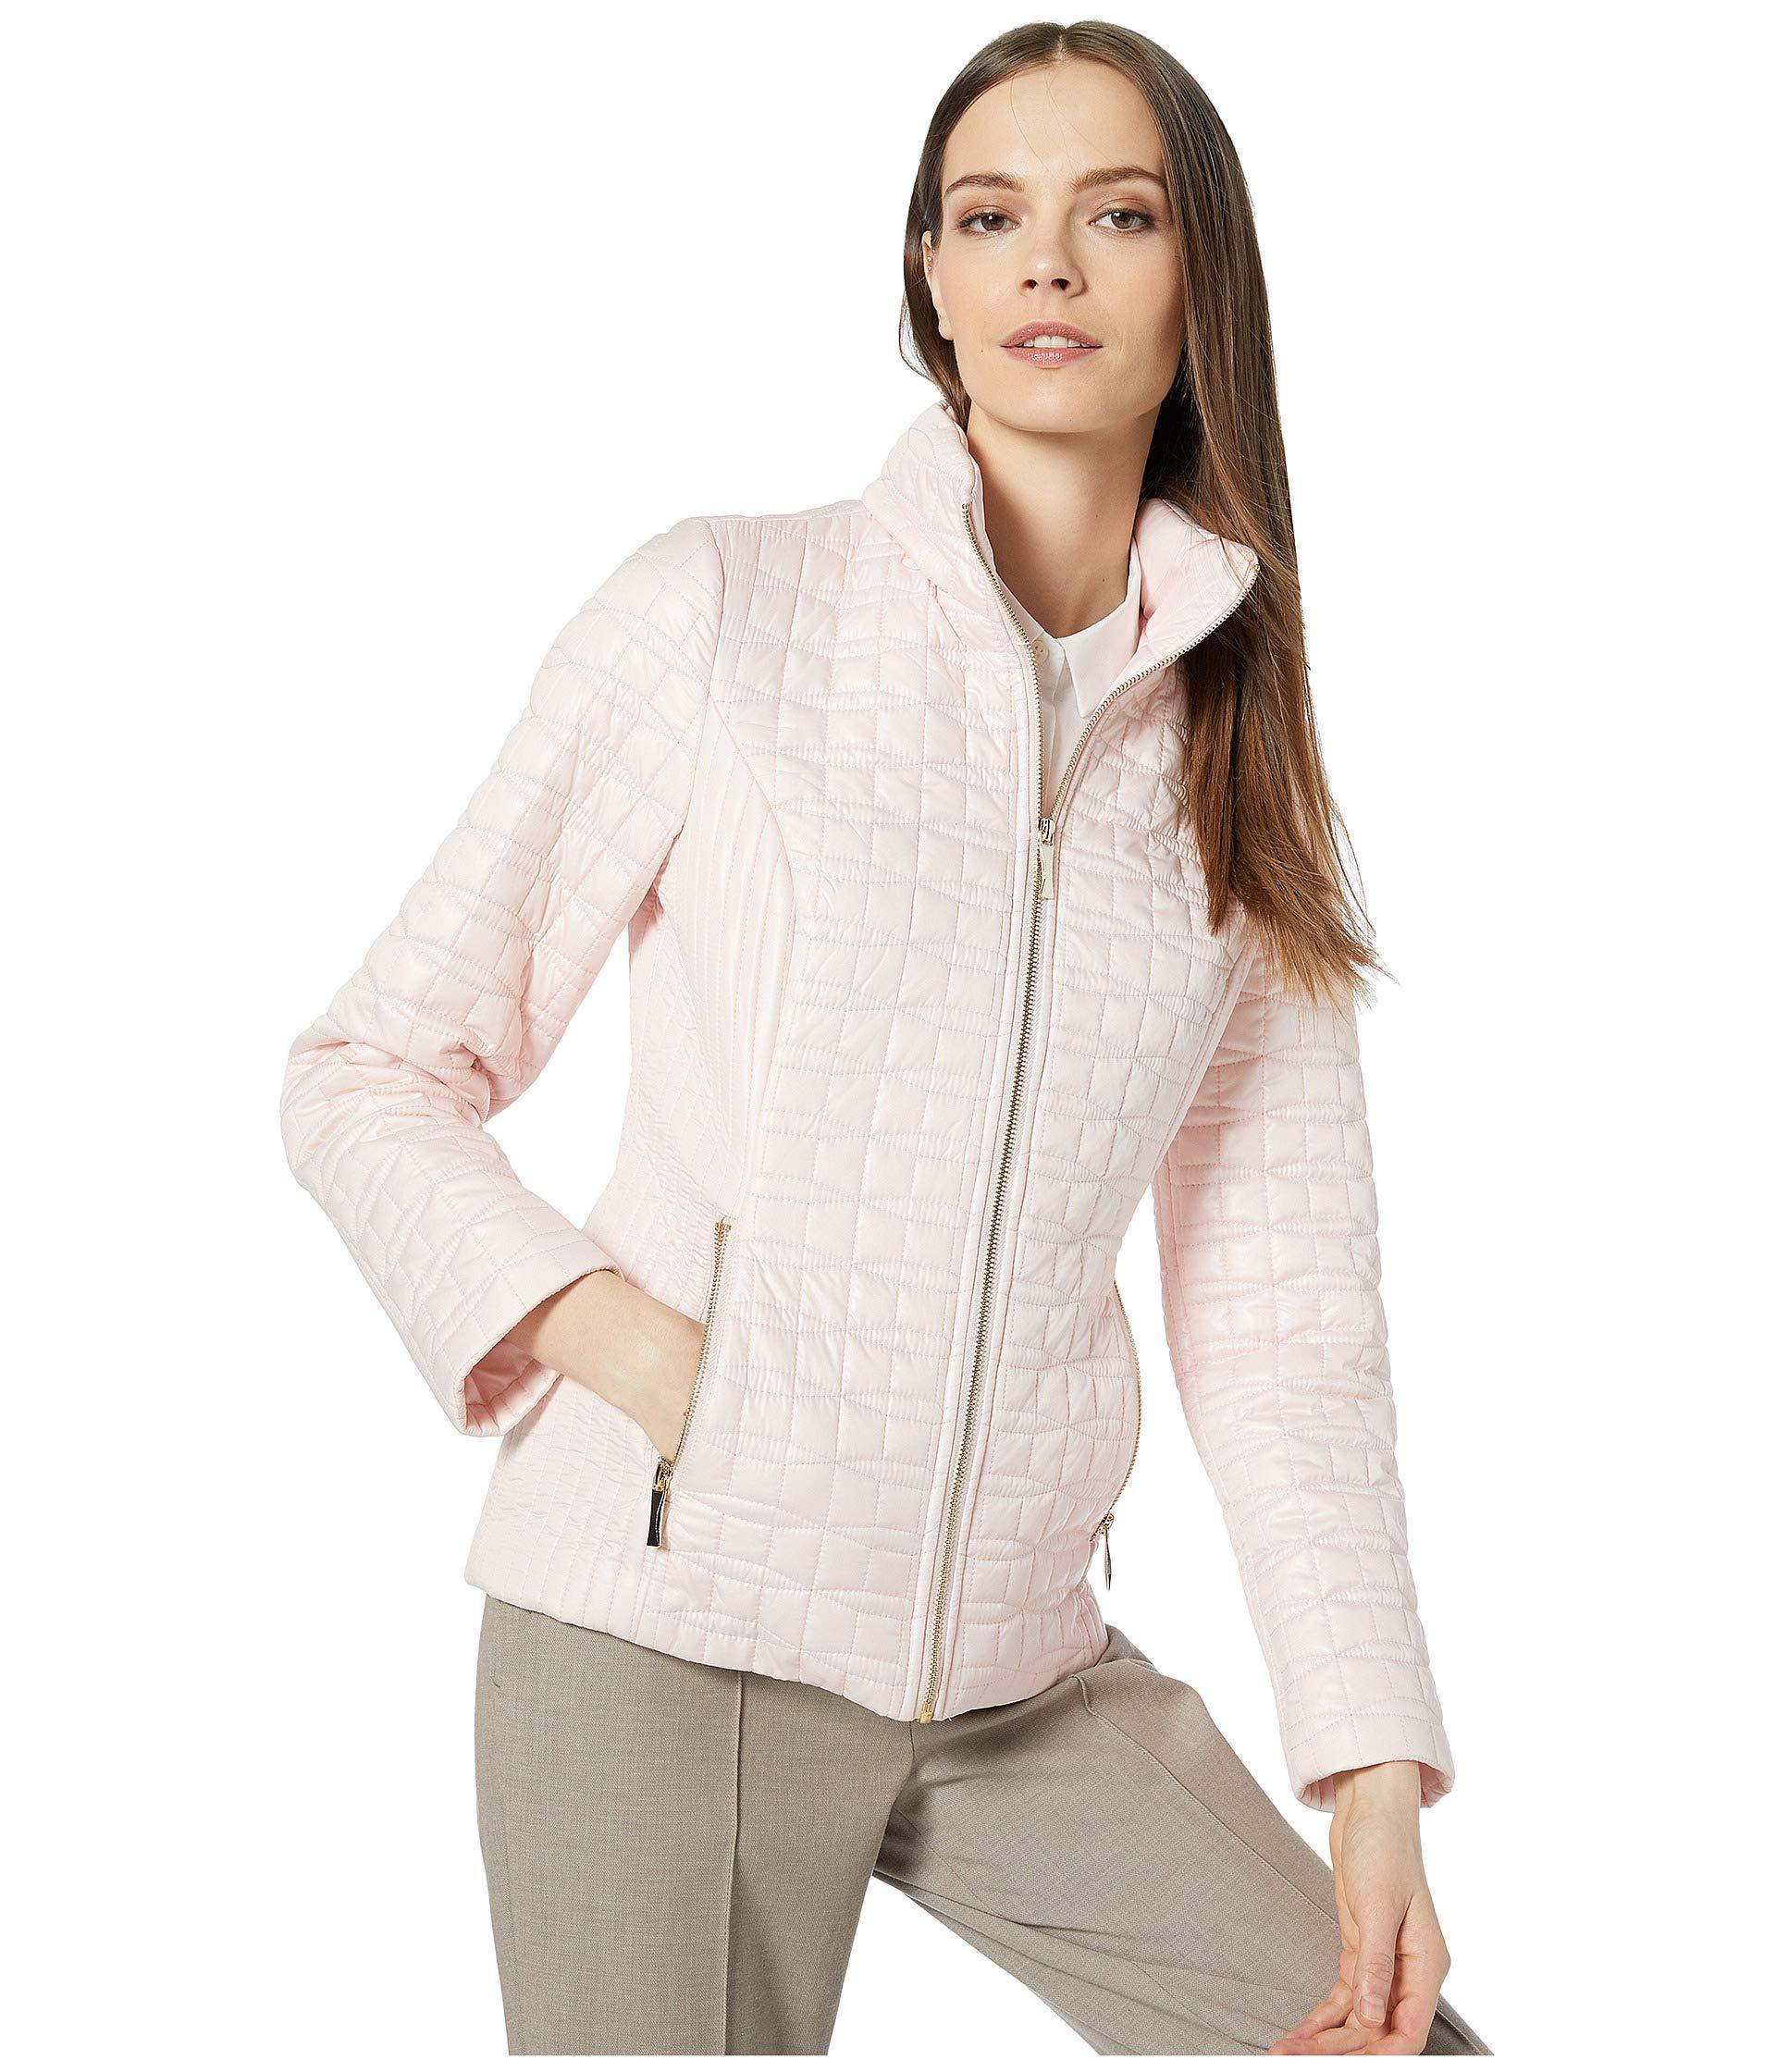 Kate Spade Synthetic Quilted Jacket in Pink - Lyst